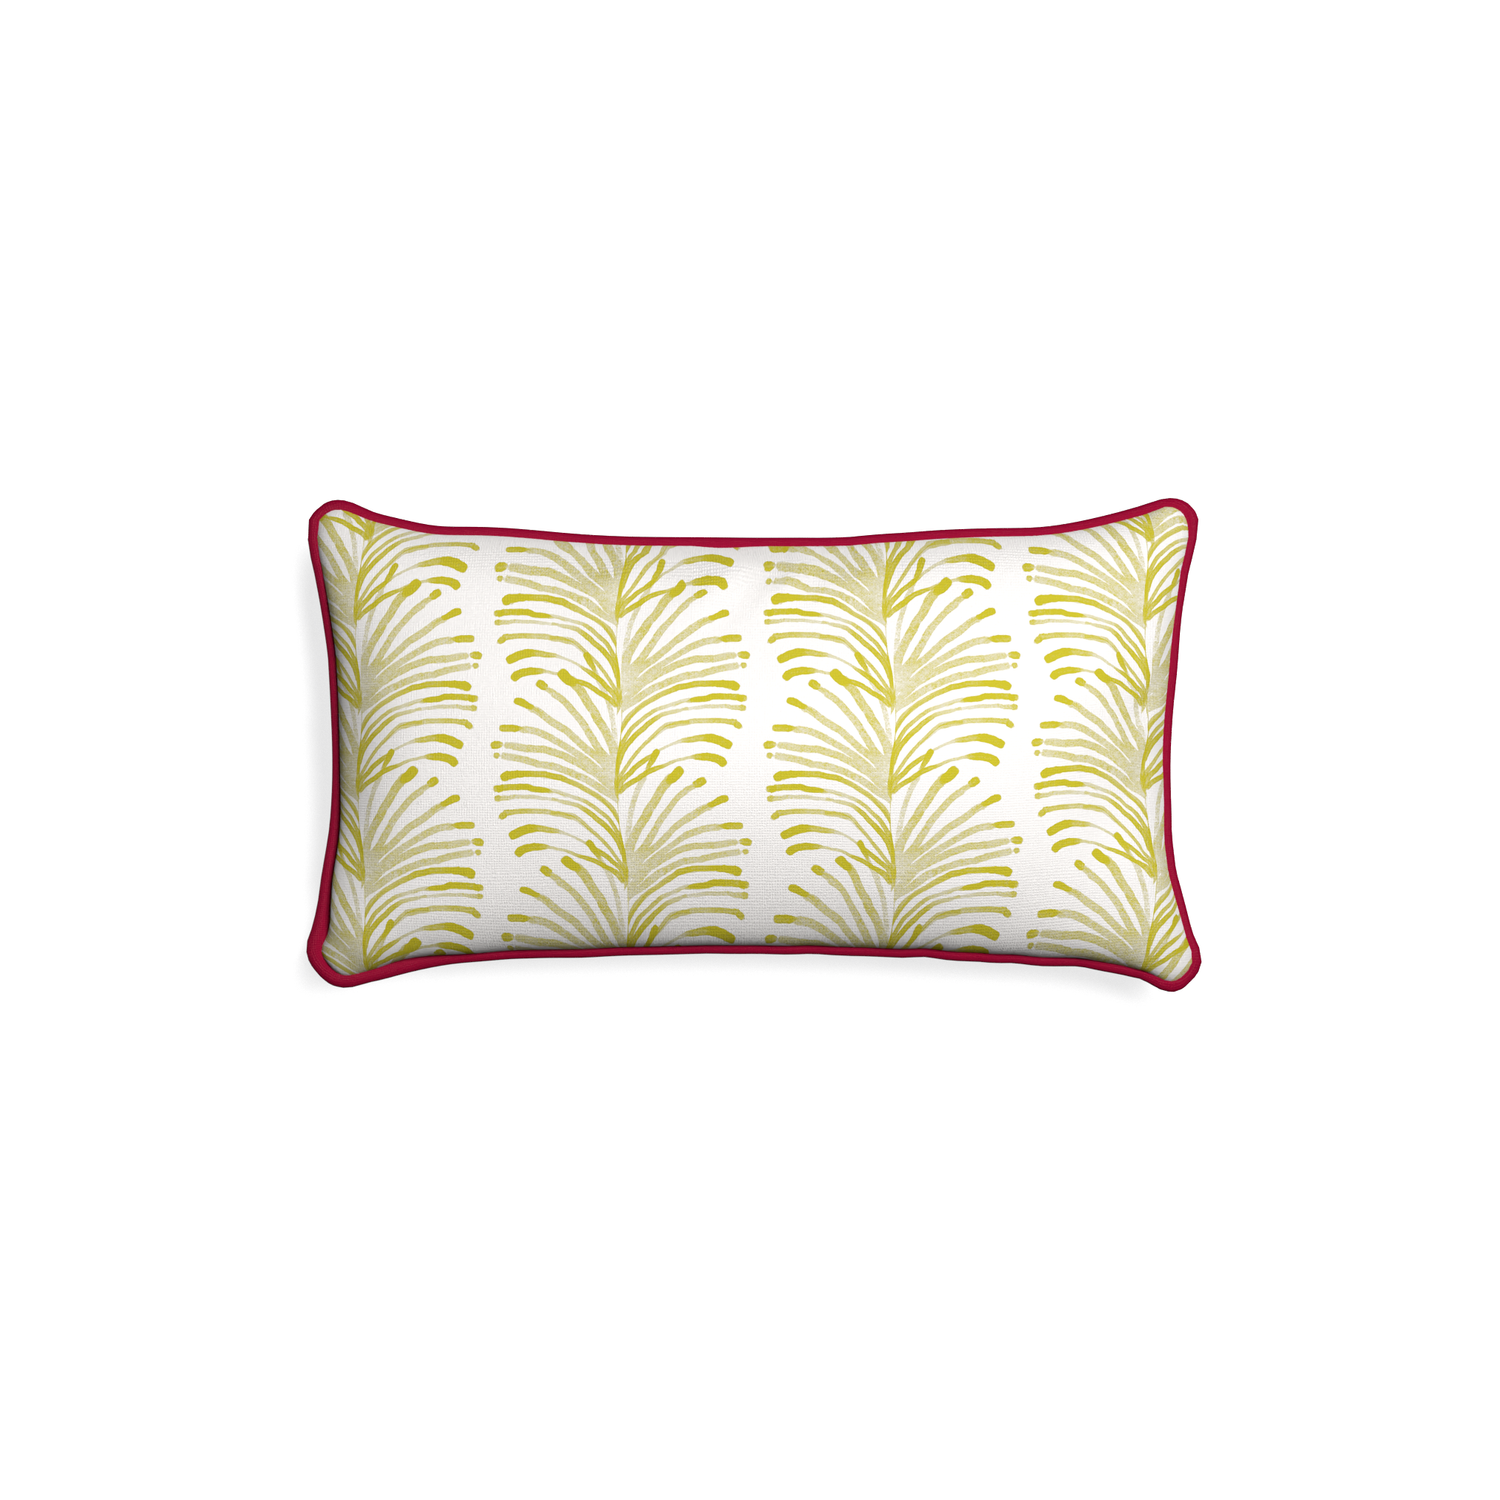 Petite-lumbar emma chartreuse custom yellow stripe chartreusepillow with raspberry piping on white background